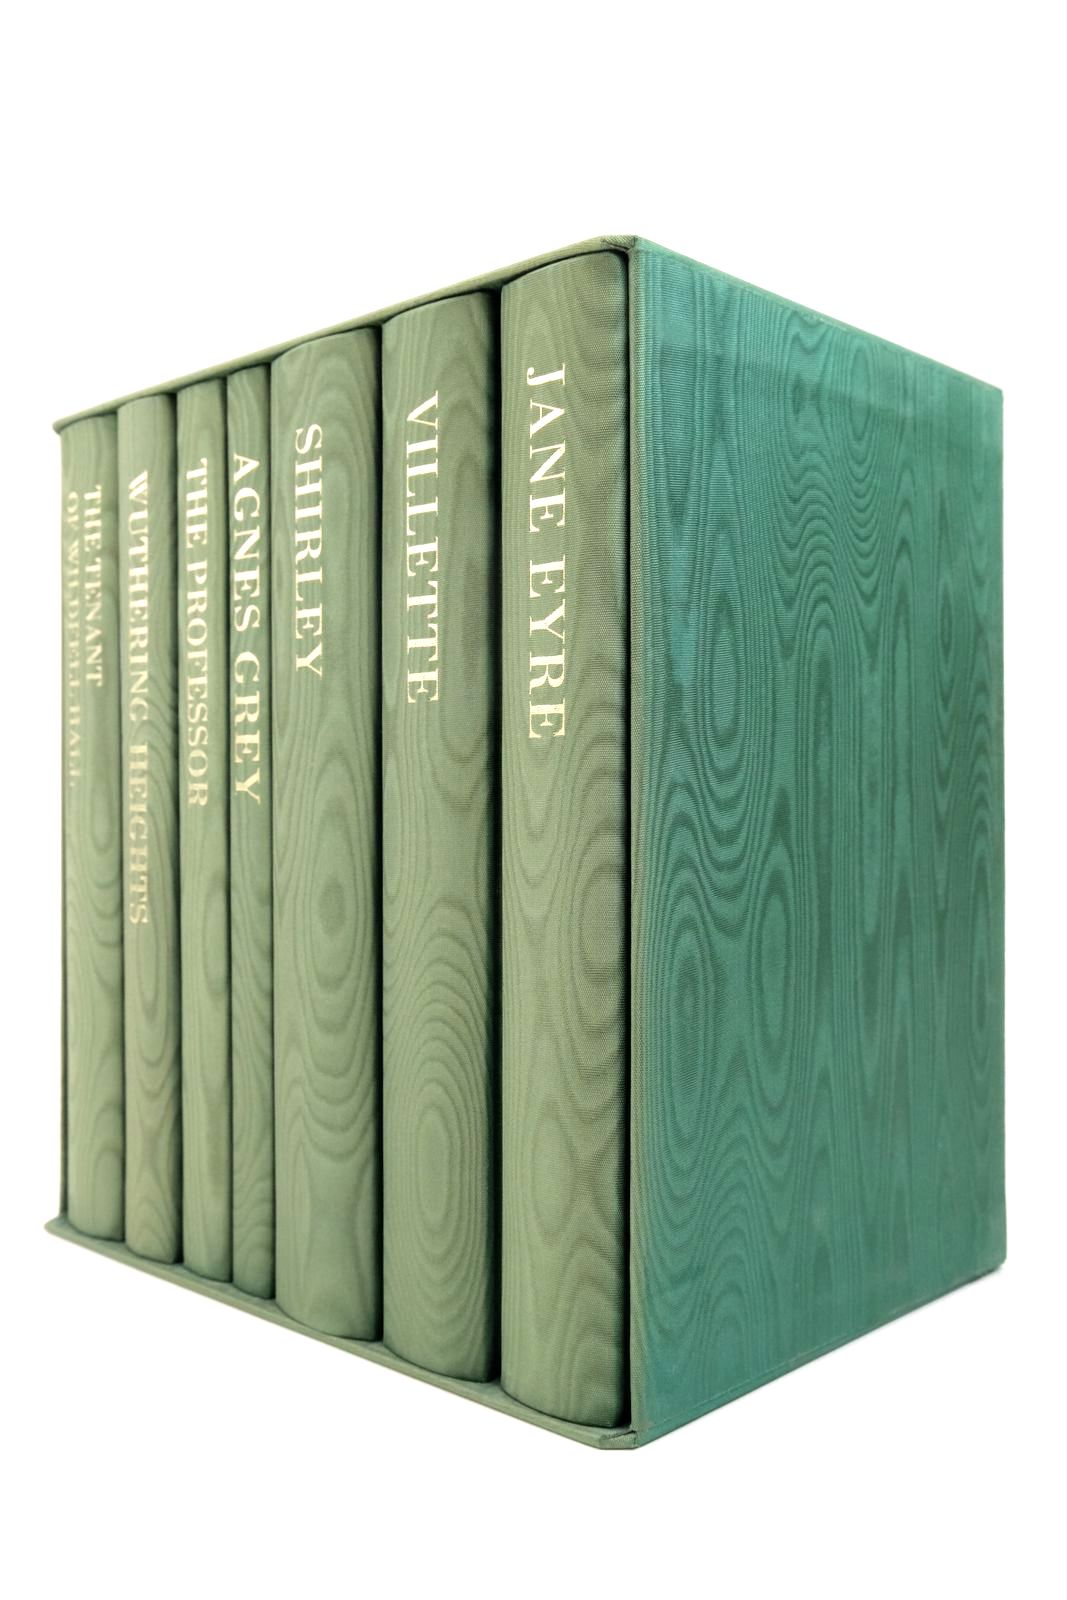 Photo of CHARLOTTE, EMILY & ANNE BRONTE THE COMPLETE NOVELS (7 VOLUMES)- Stock Number: 2138404